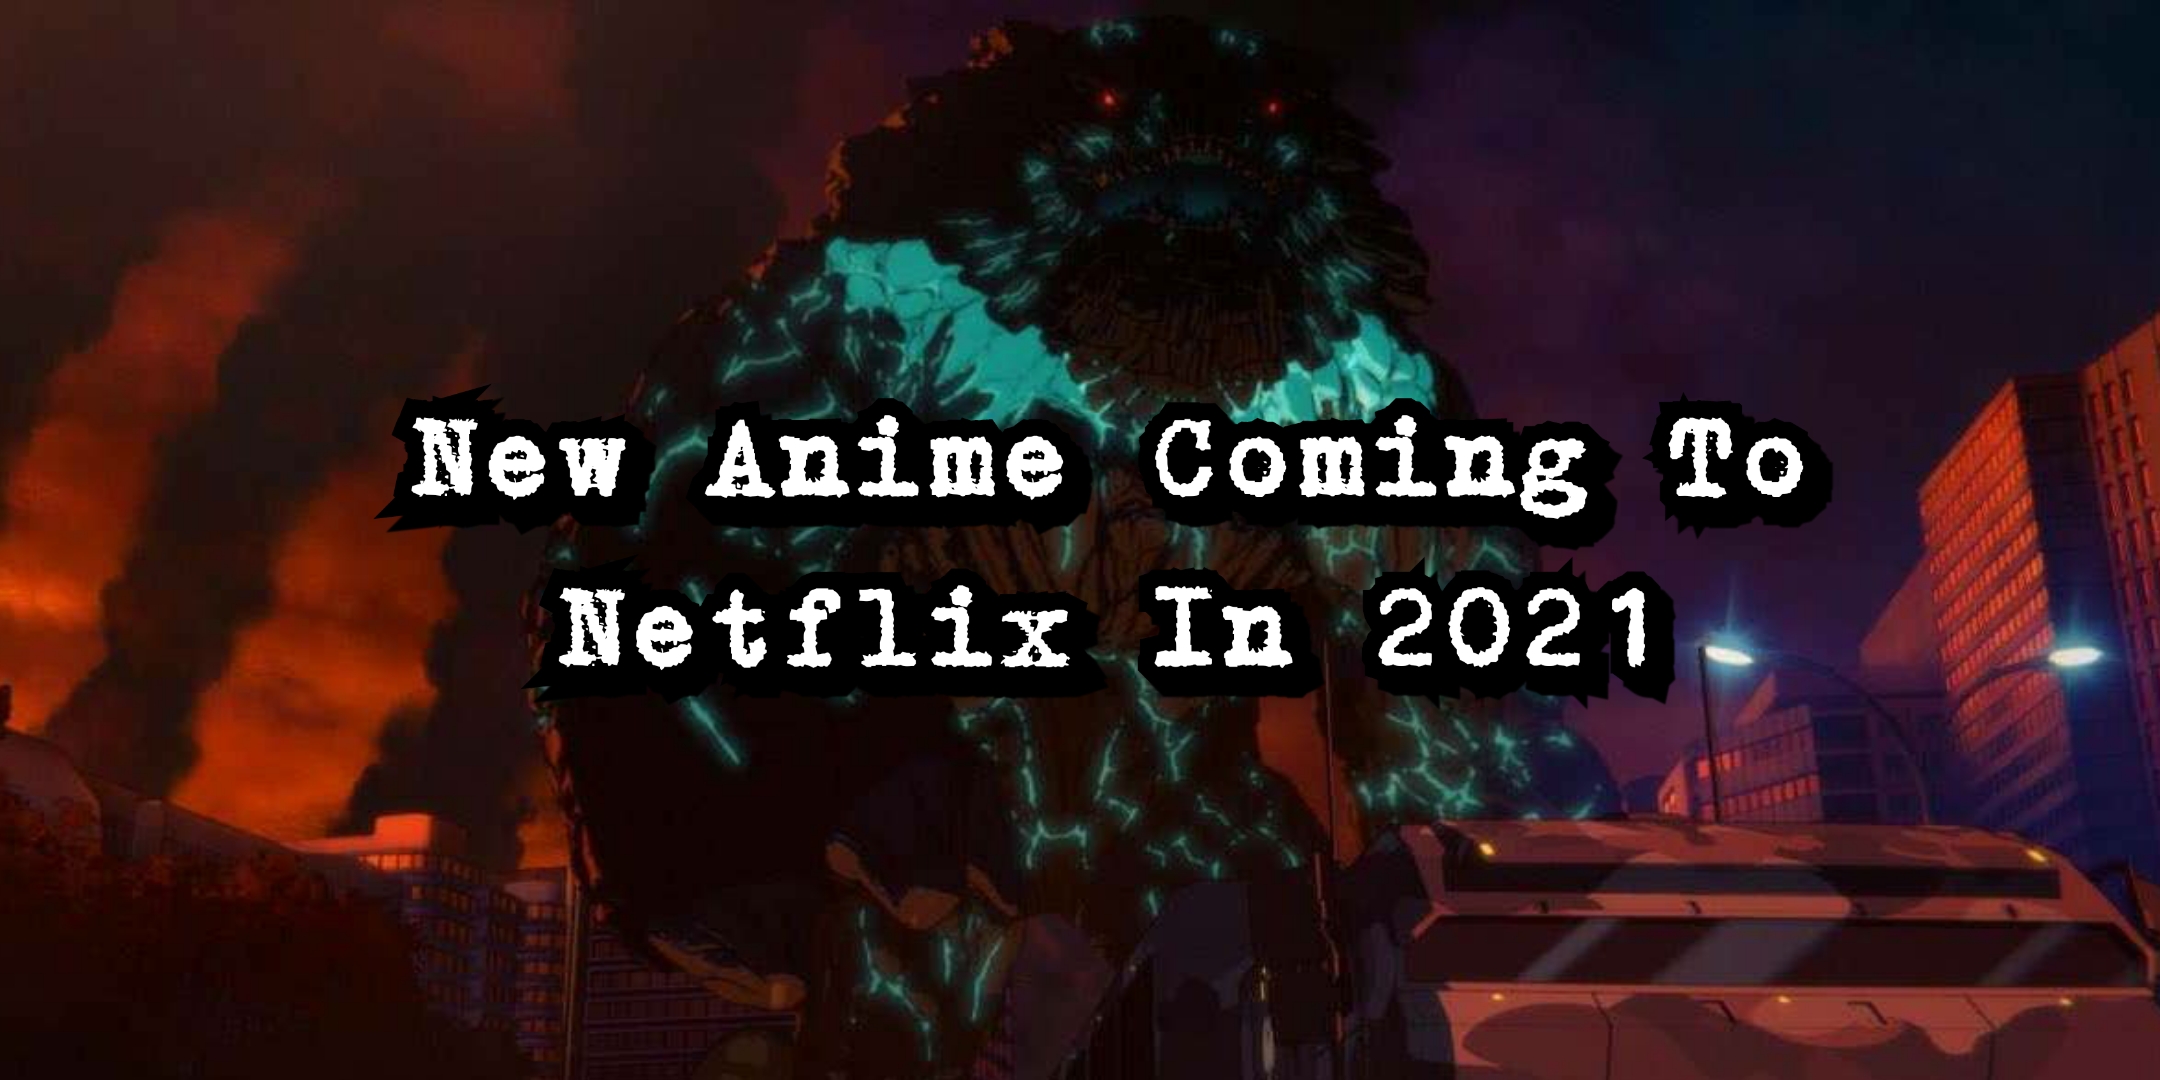 Anime Coming to Netflix in 2021 - What's on Netflix